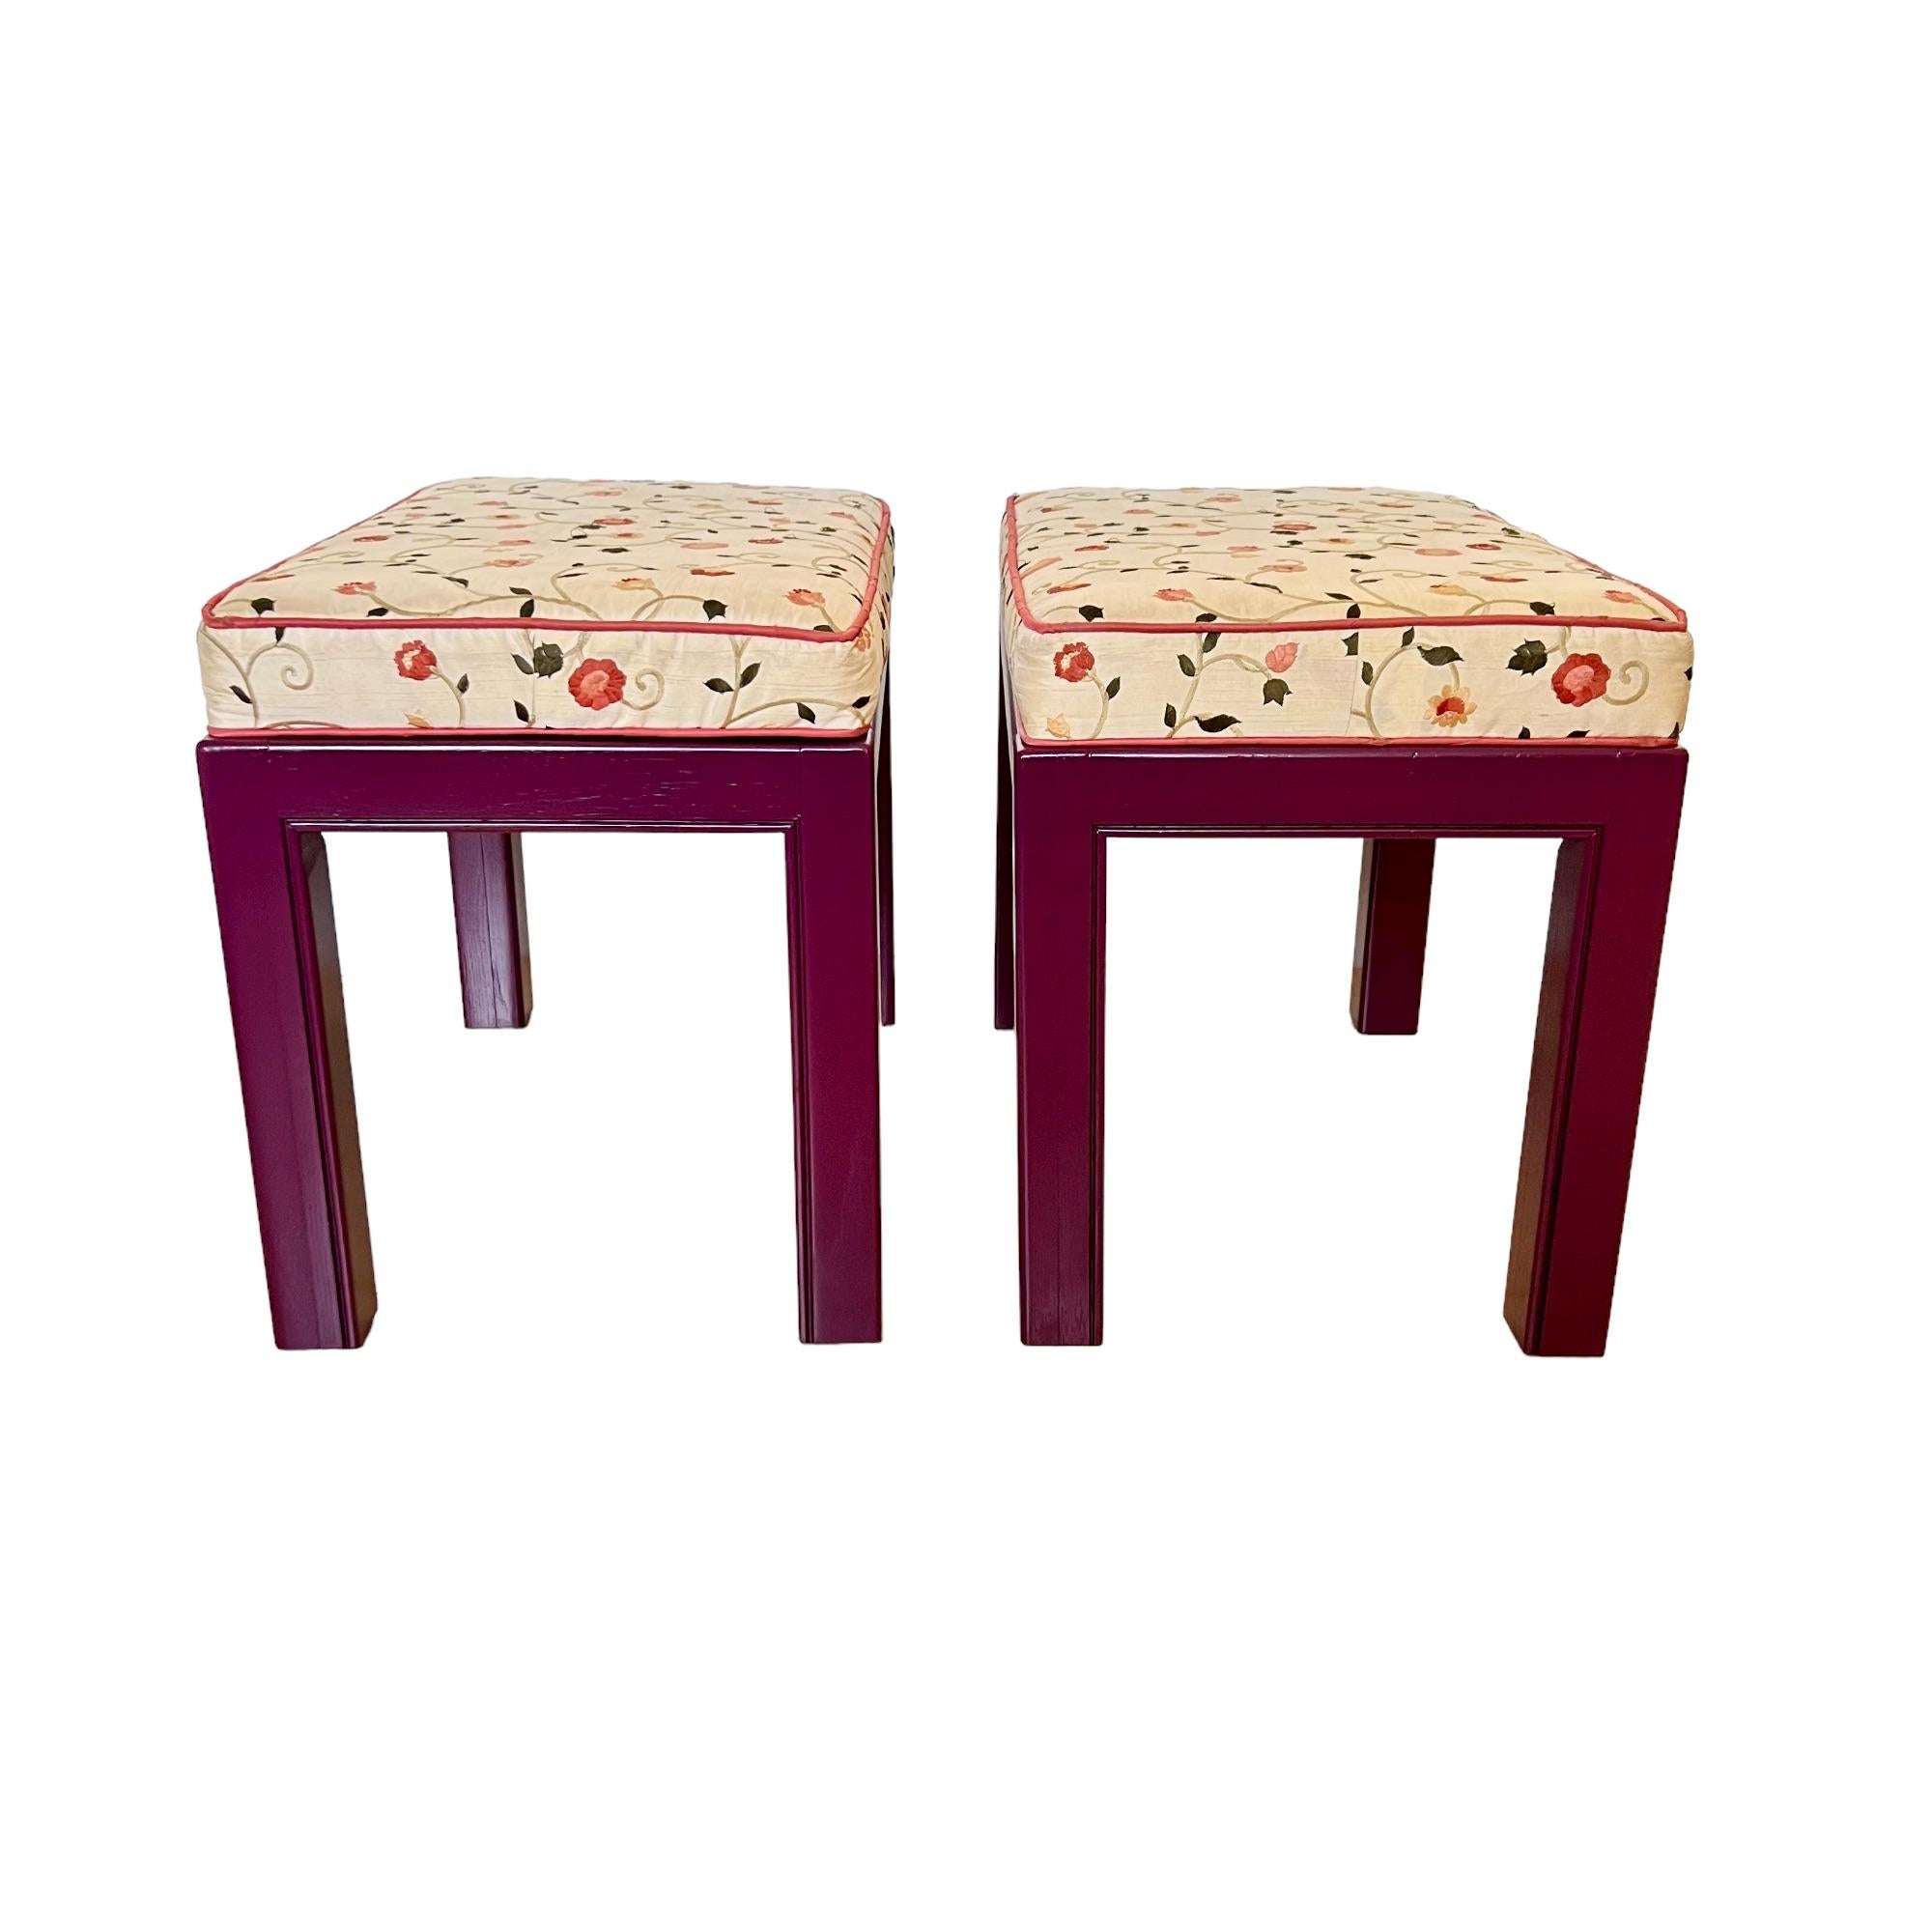 Carved Drexel Chippendale Upholstered Aubergine Benches, a Pair